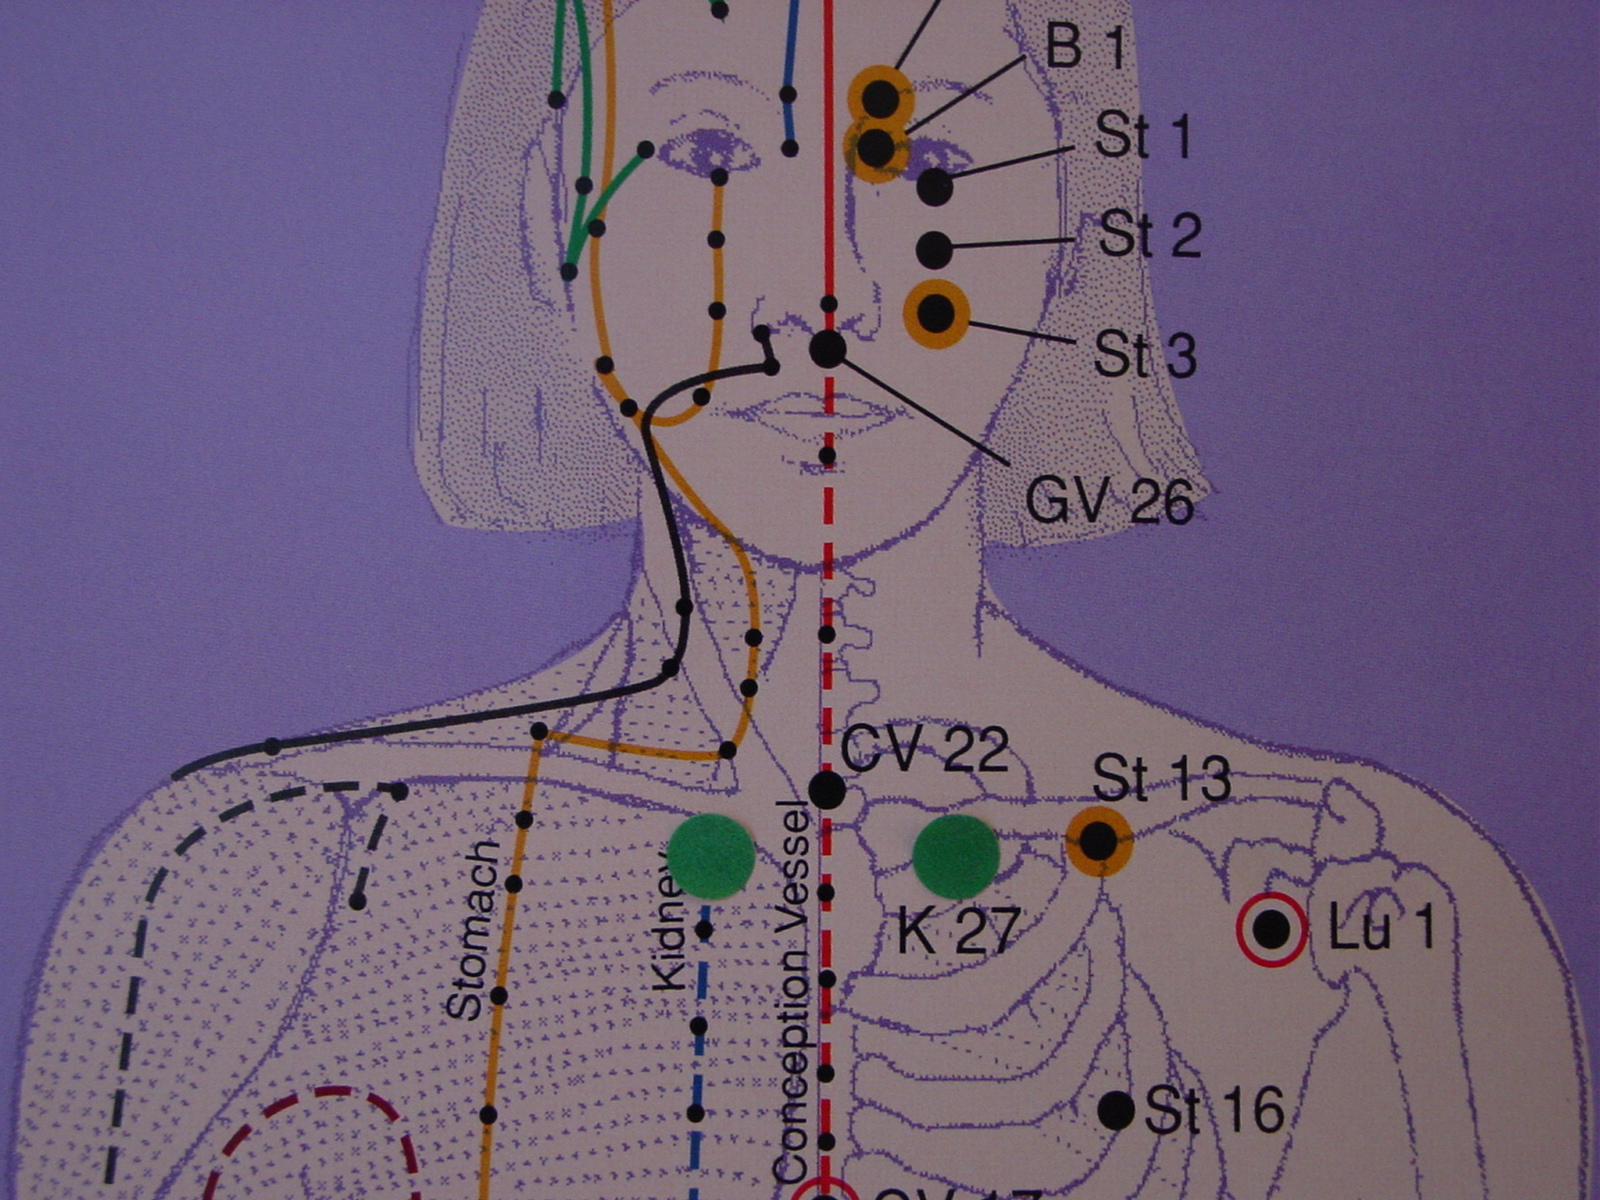 Where can I find a diagram of body pressure points?